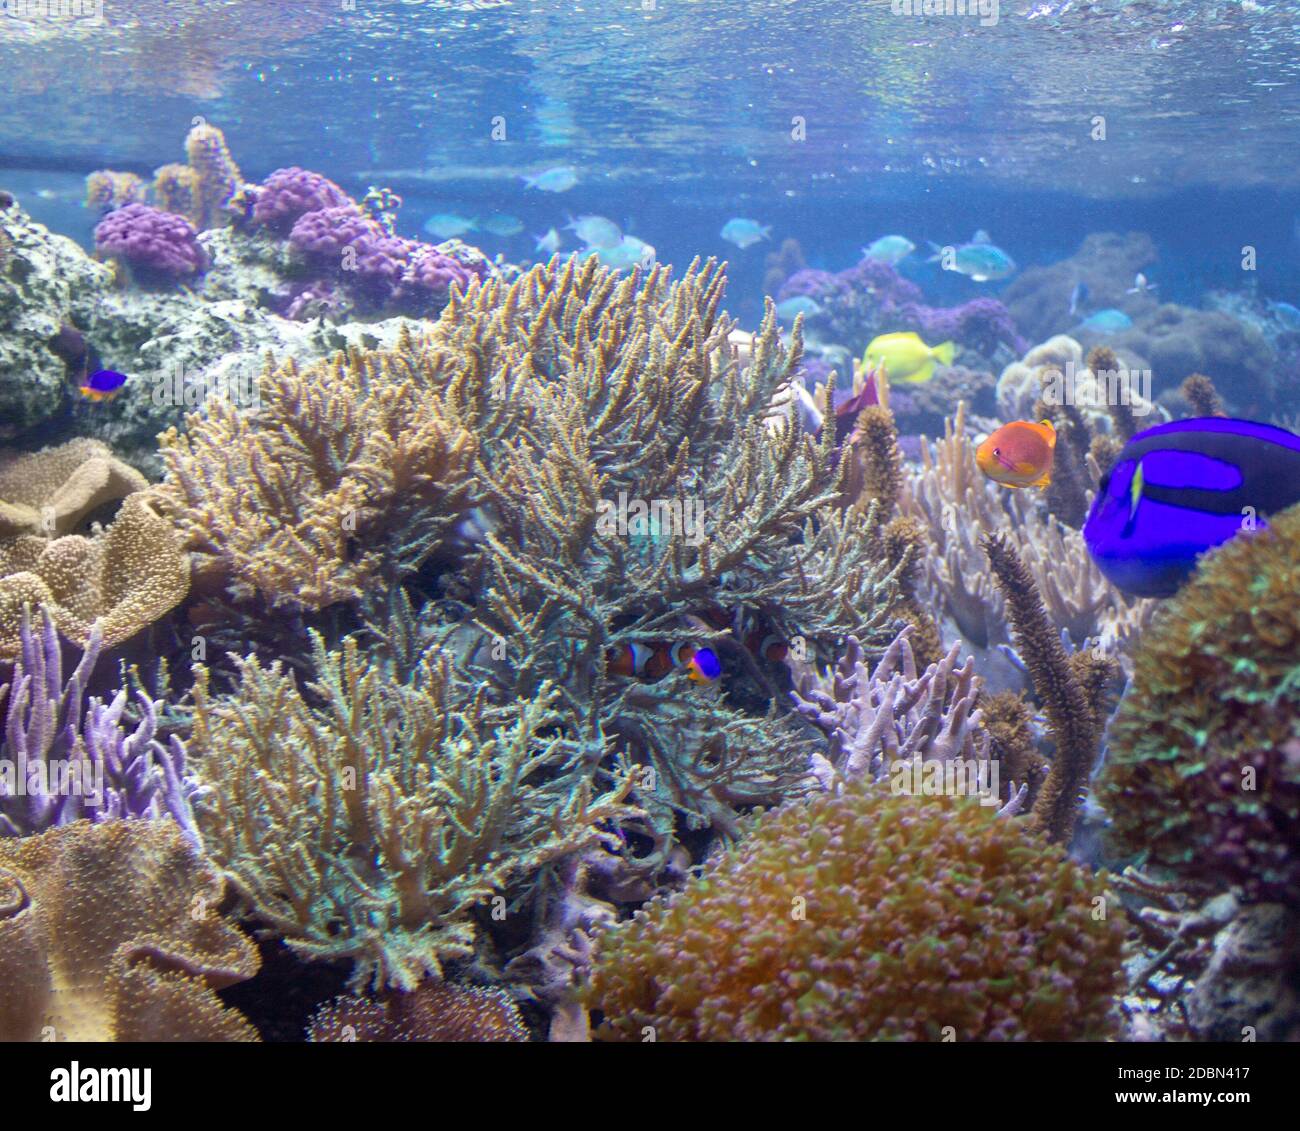 colorful coral reef scenery with lots of different corals, sea anemones and fishes Stock Photo